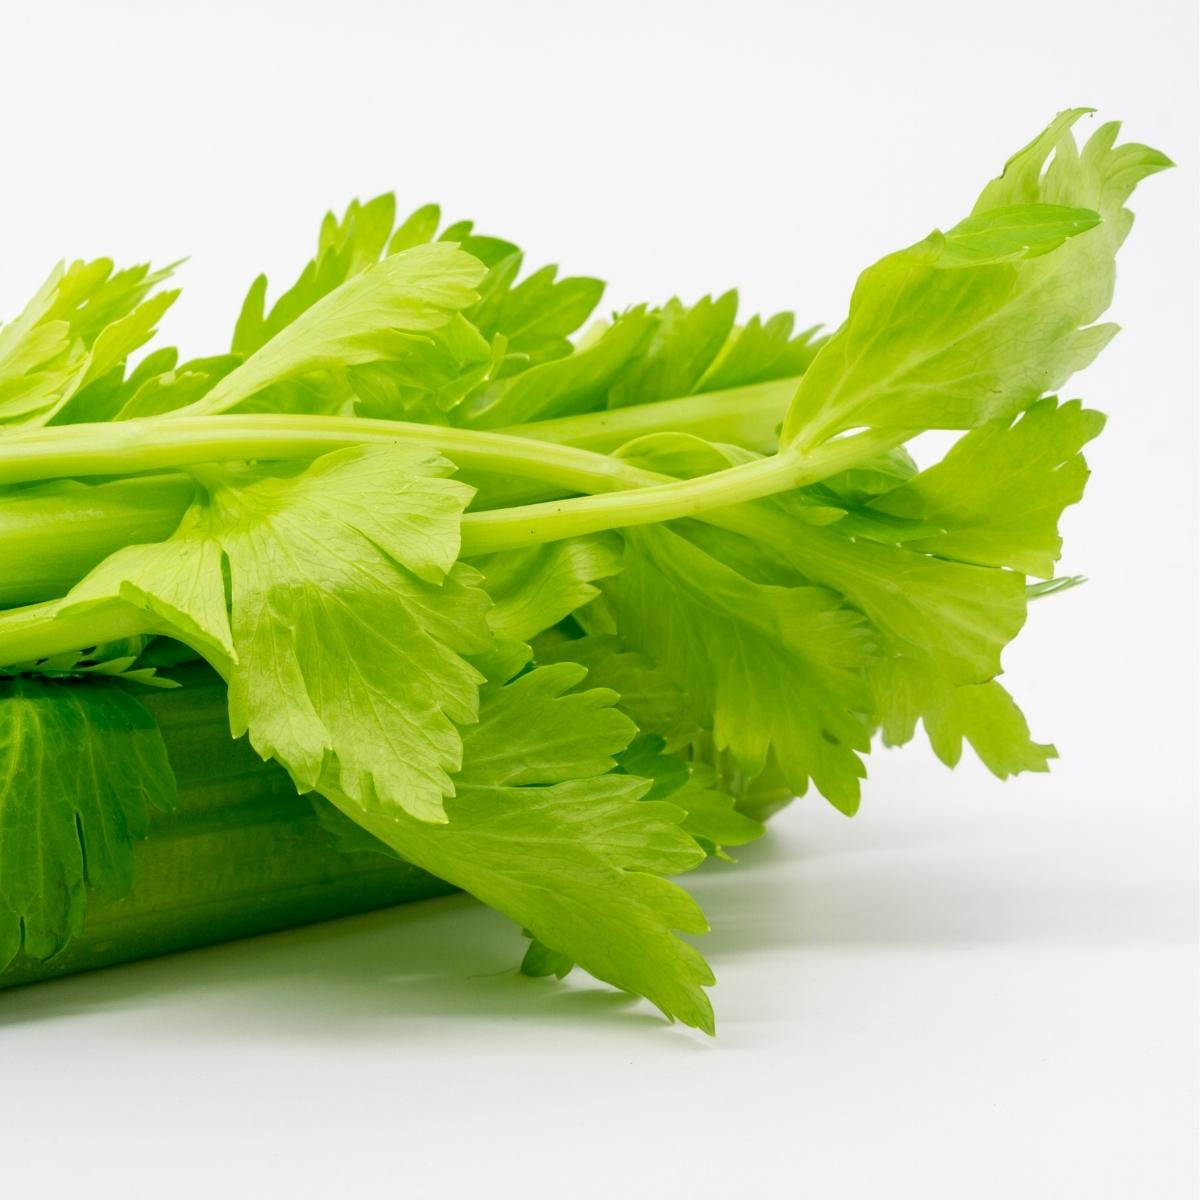 Bright, yellow-green celery leaves.